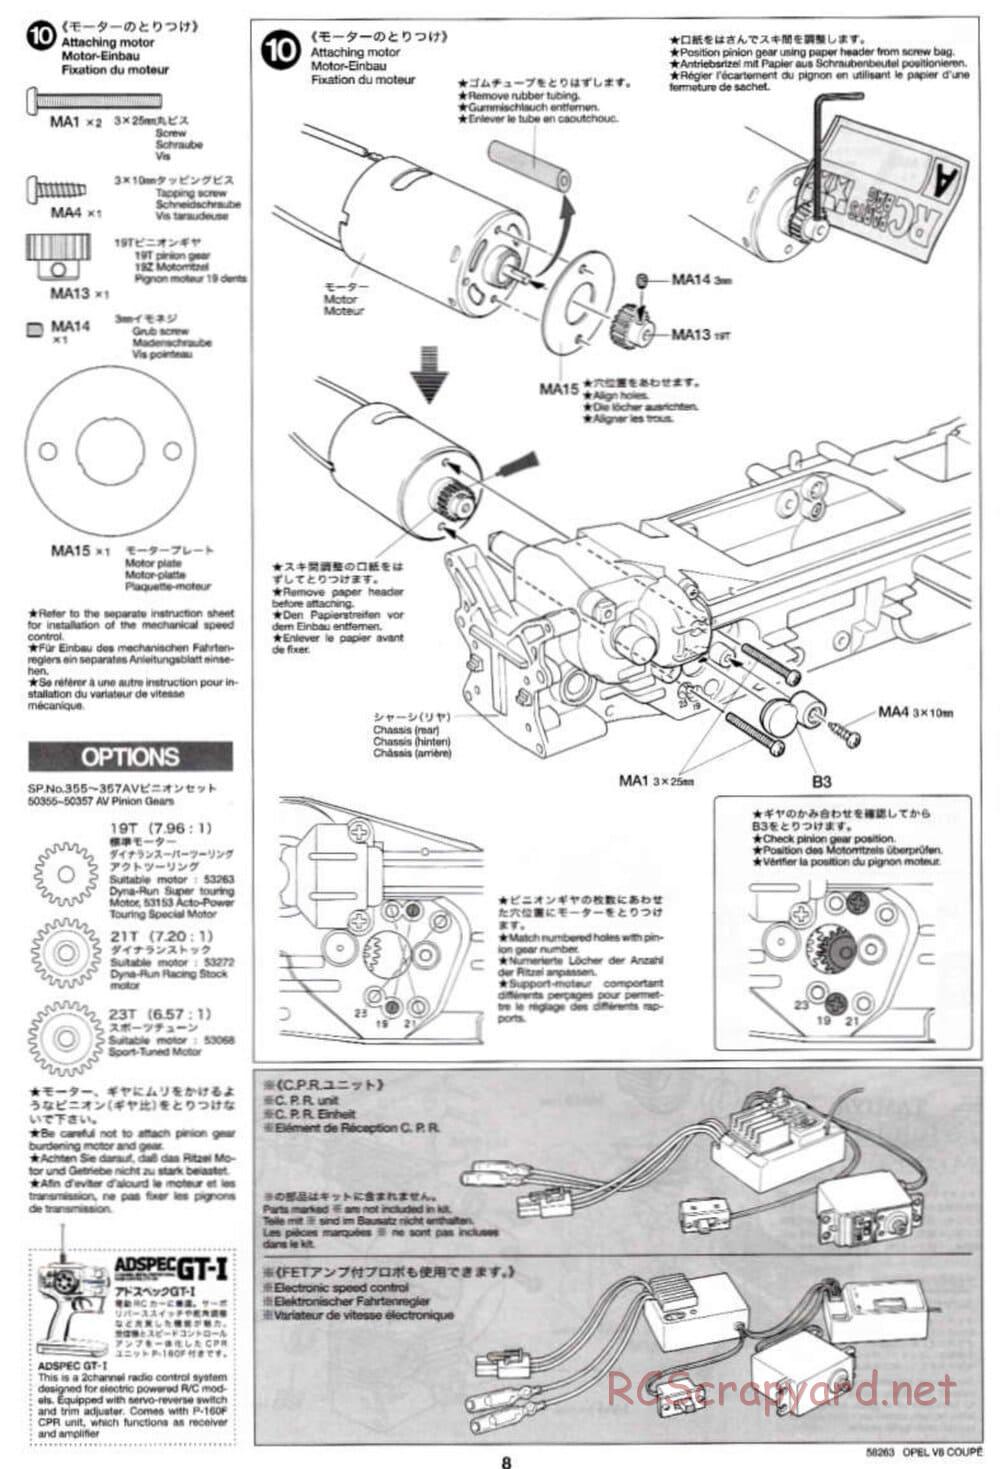 Tamiya - Opel V8 Coupe - TL-01 Chassis - Manual - Page 8